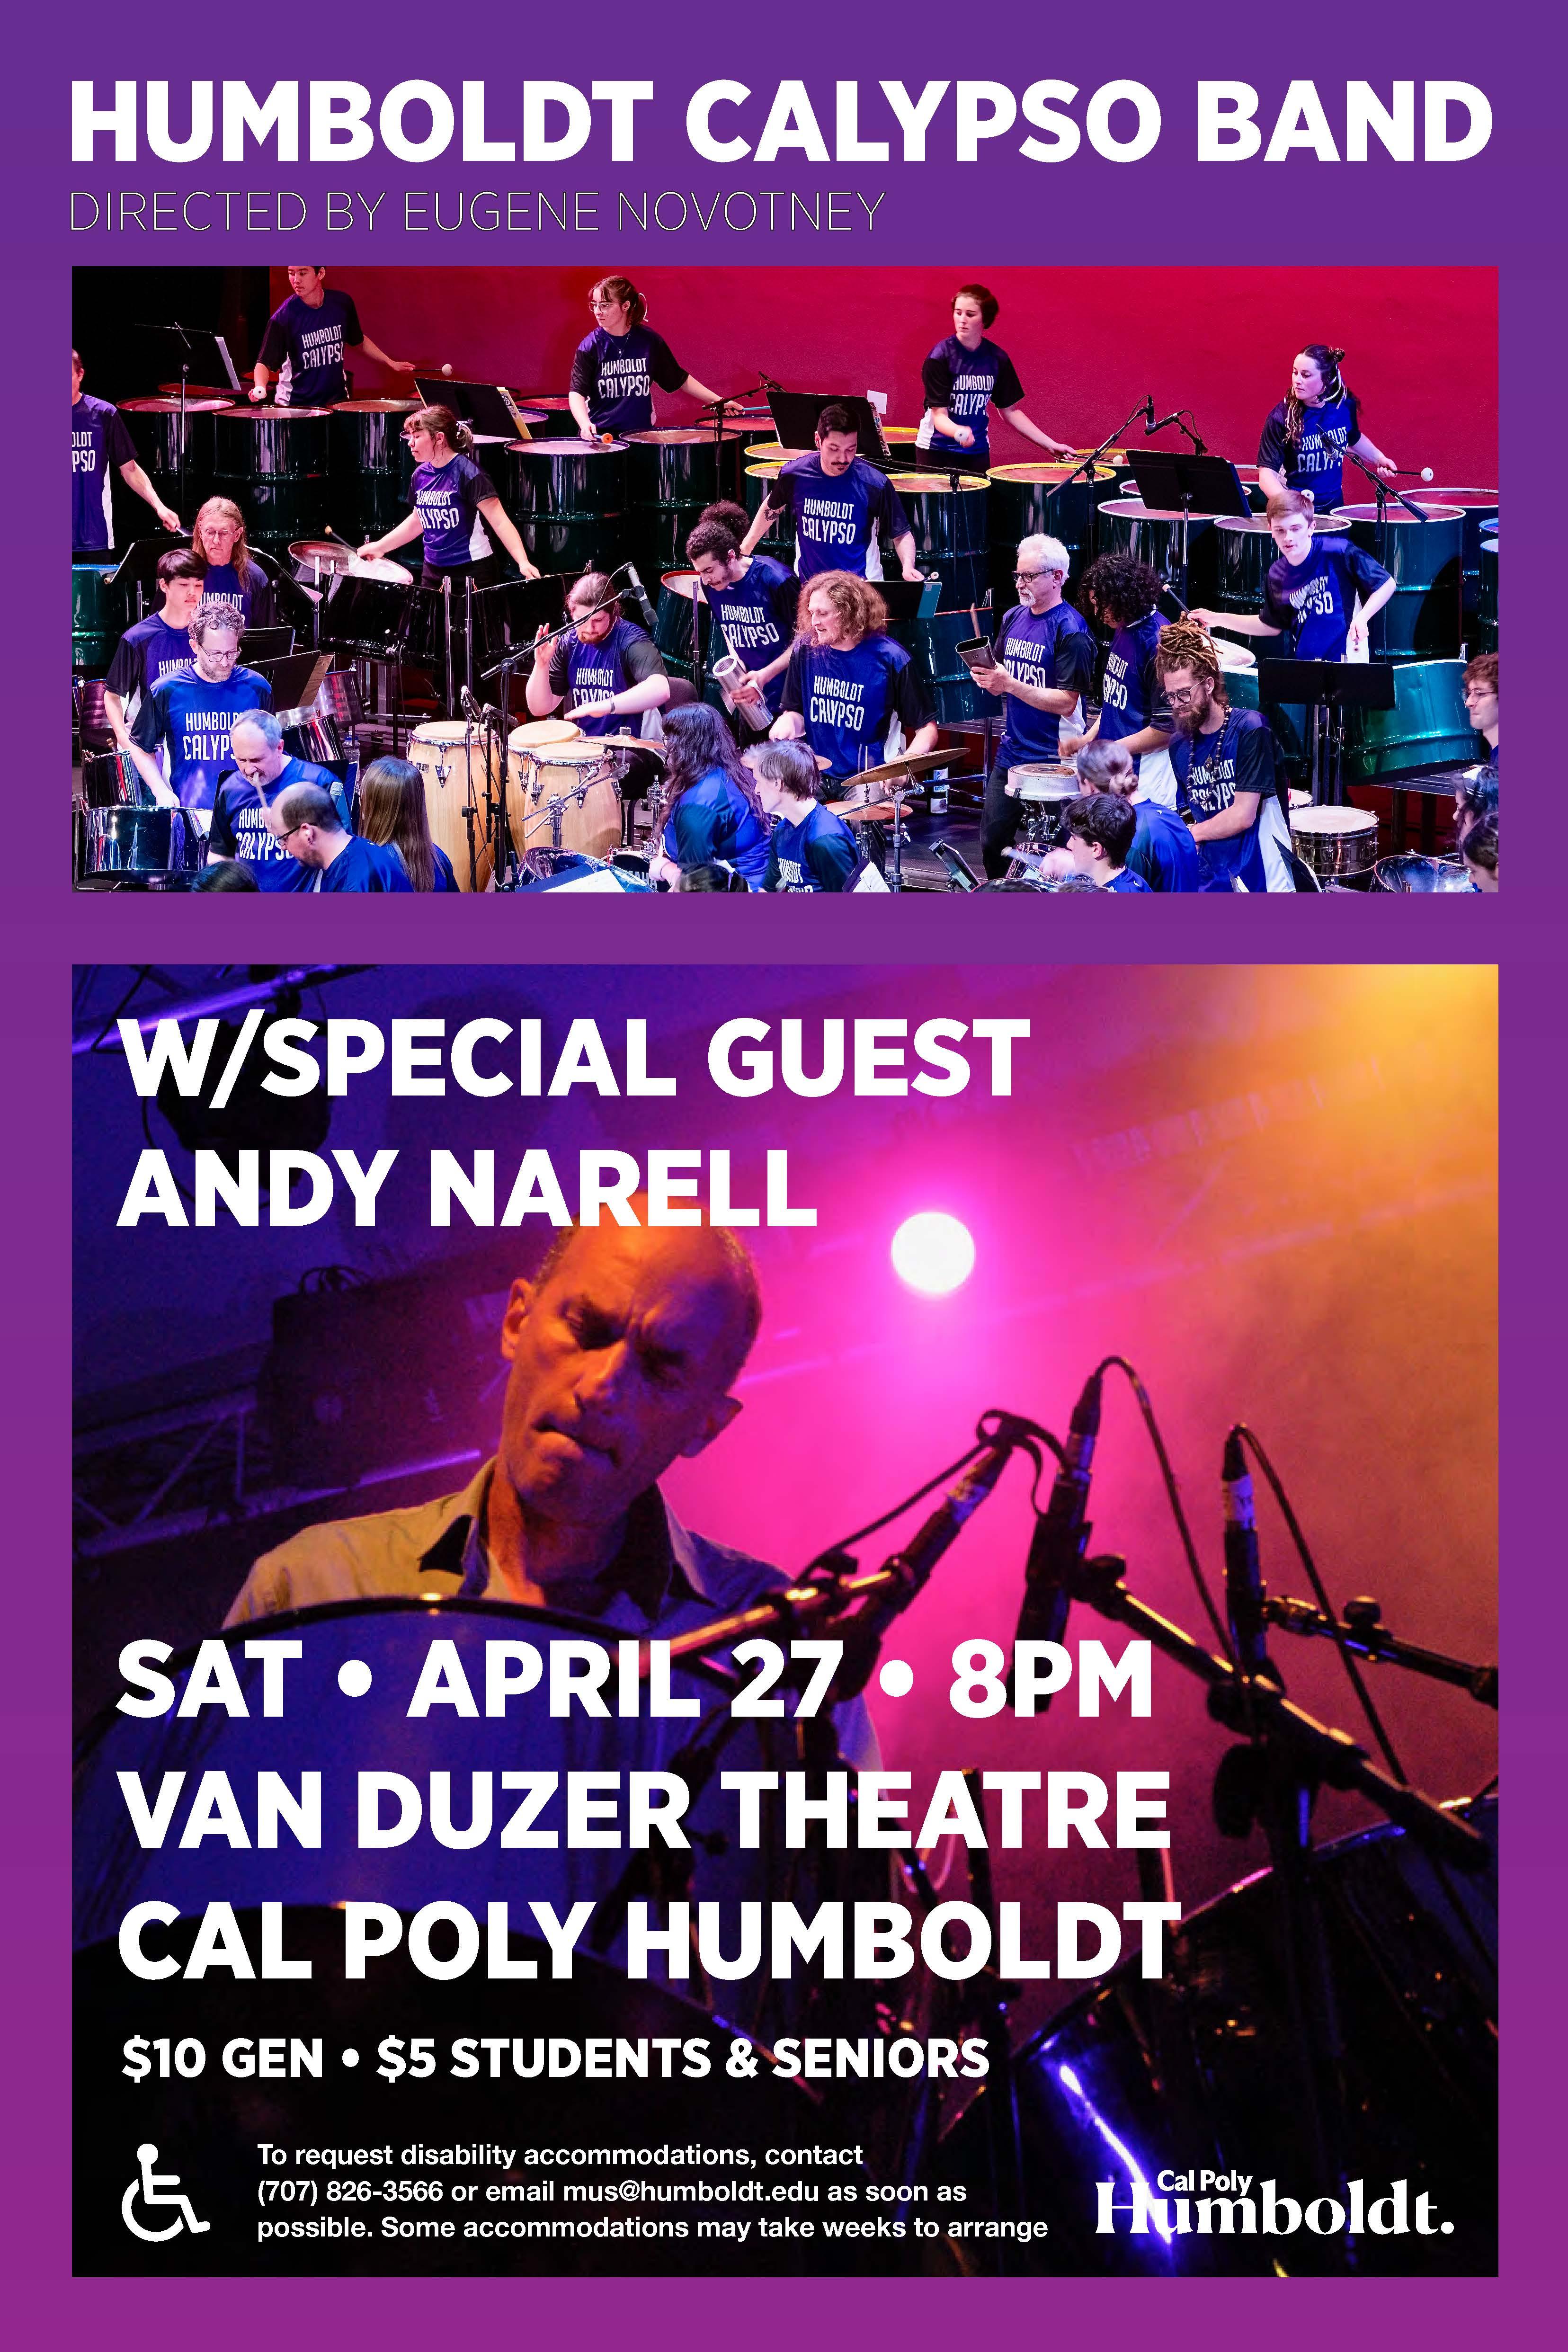 Humboldt Calypso Band with Special Guest Andy Narell - Directed by Eugene Novotney - Saturday April 27 at 8 PM in the Van Duzer Theatre - $10 General, $5 Students and Seniors